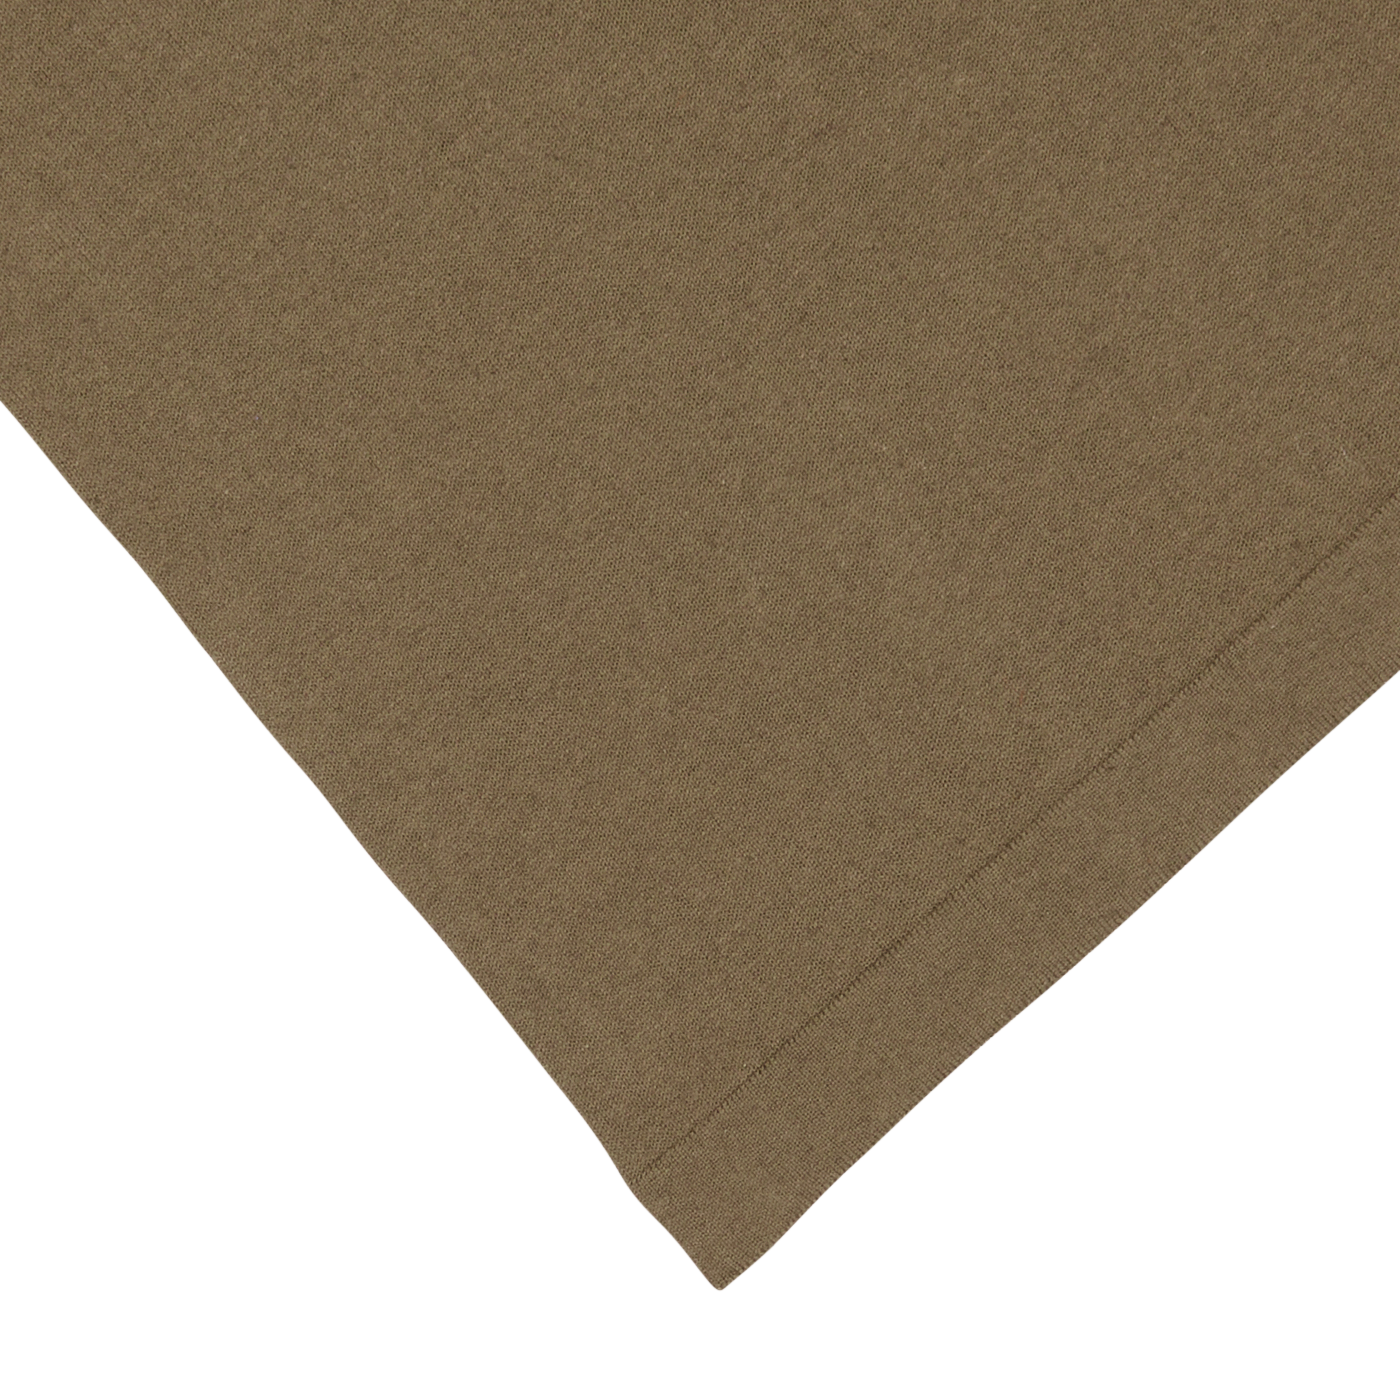 A piece of Olive Green Cotton-Linen Blend fabric folded on top of a white surface by G.R.P.